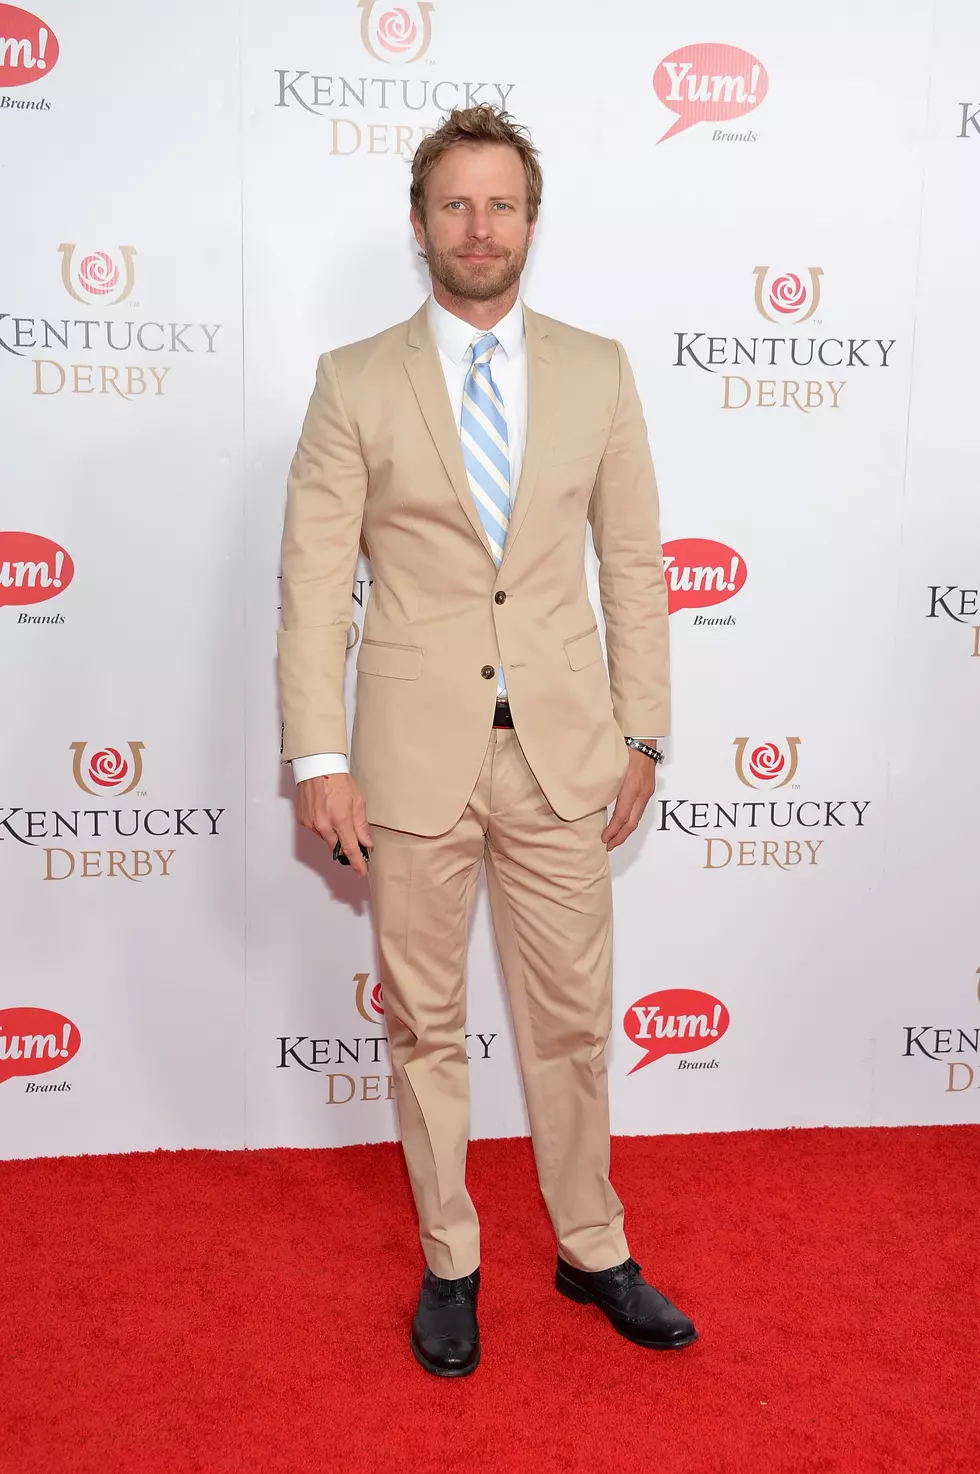 Dierks Bentley Asks for Help With Kentucky Derby Fashion